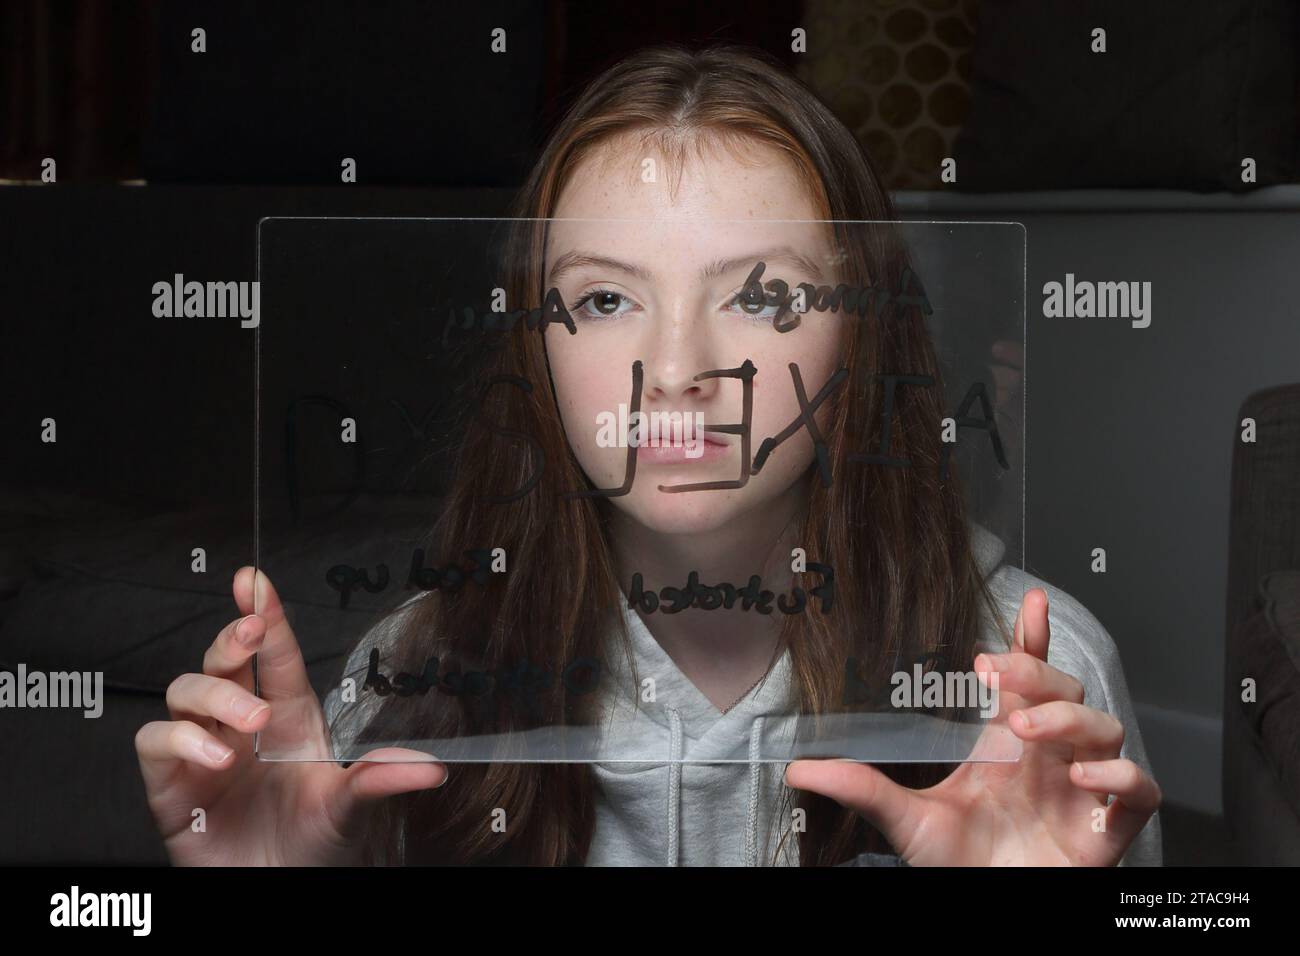 Teenage girl holds transparent plastic board with words related to dyslexia in front of her face, showing emotions Stock Photo